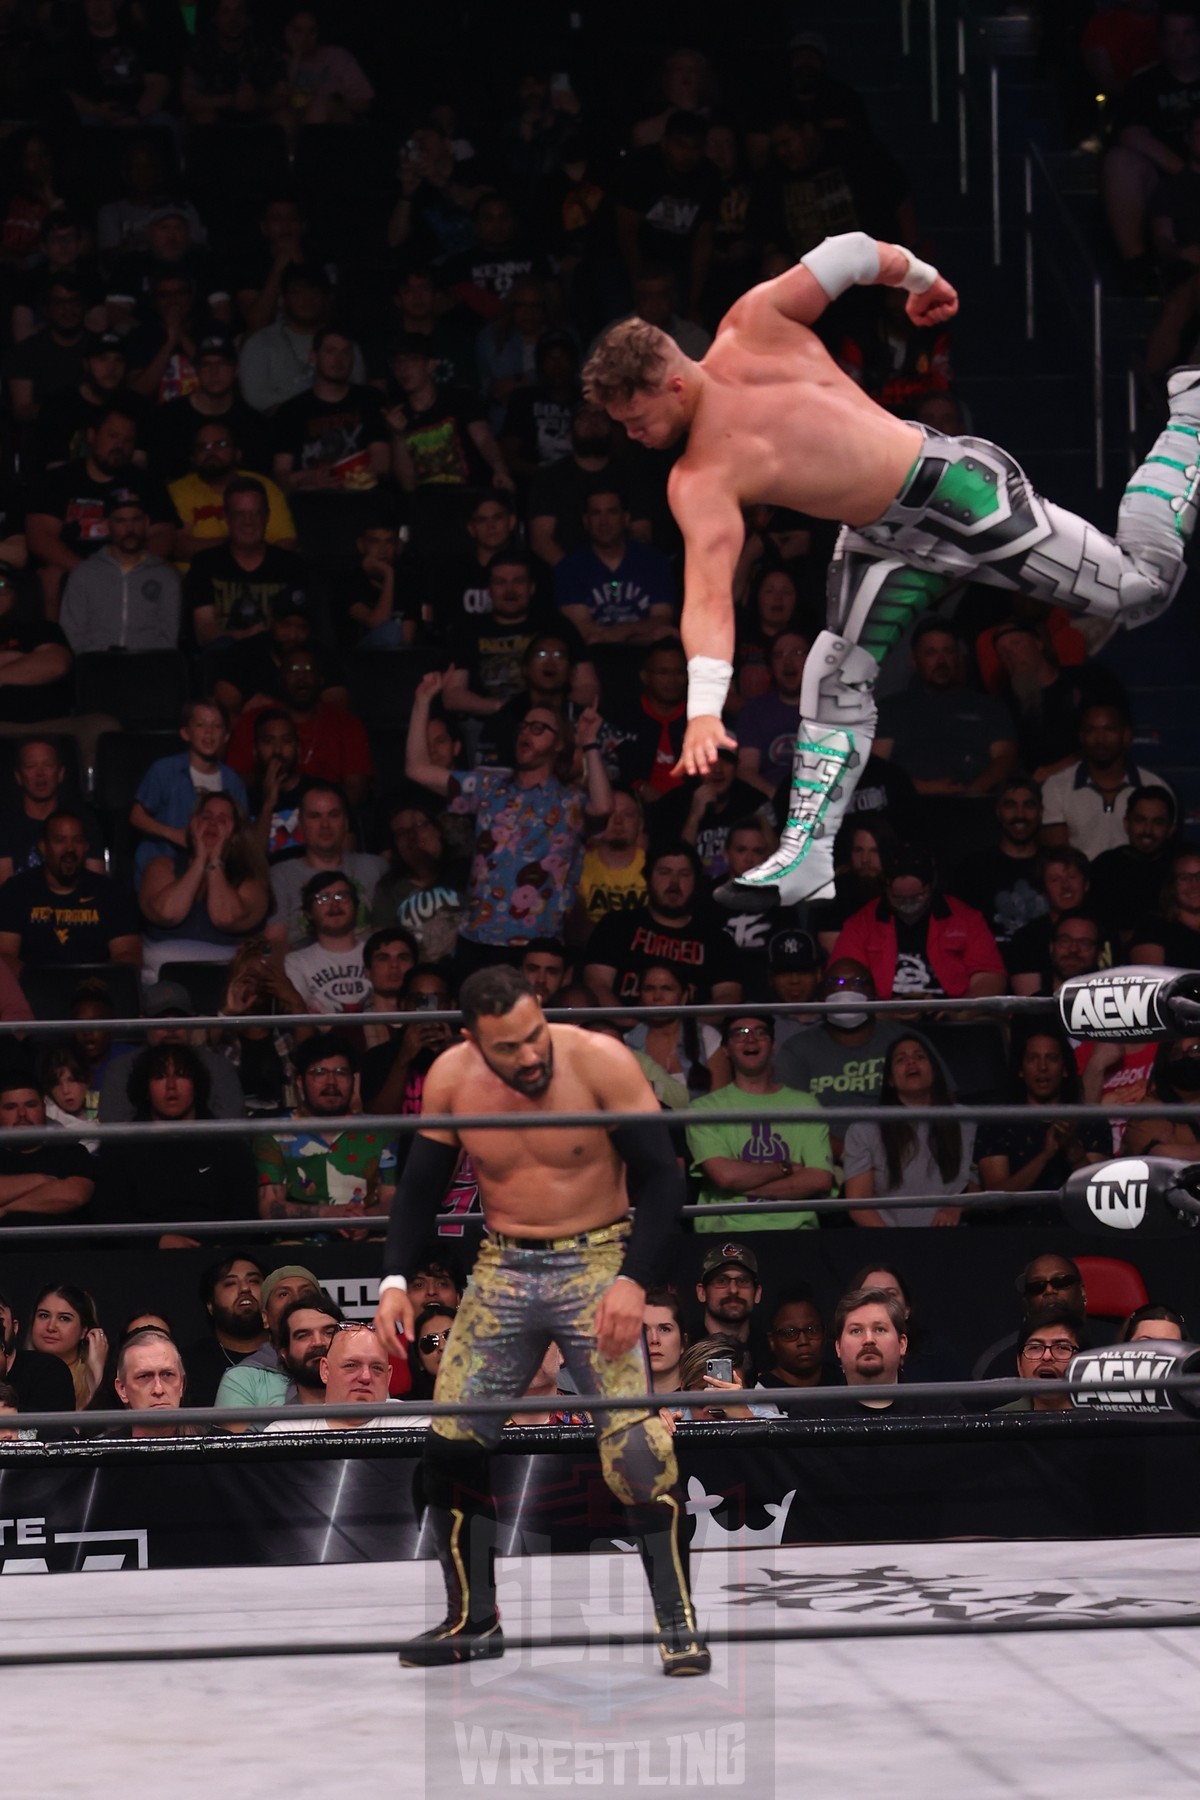 Will Ospreay defies gravity against Rocky Romero at AEW Rampage, taped on Wednesday, June 14, 2023, at the Capitol One Arena in Washington, DC, and aired on June 16, 2023. Photo by George Tahinos, https://georgetahinos.smugmug.com